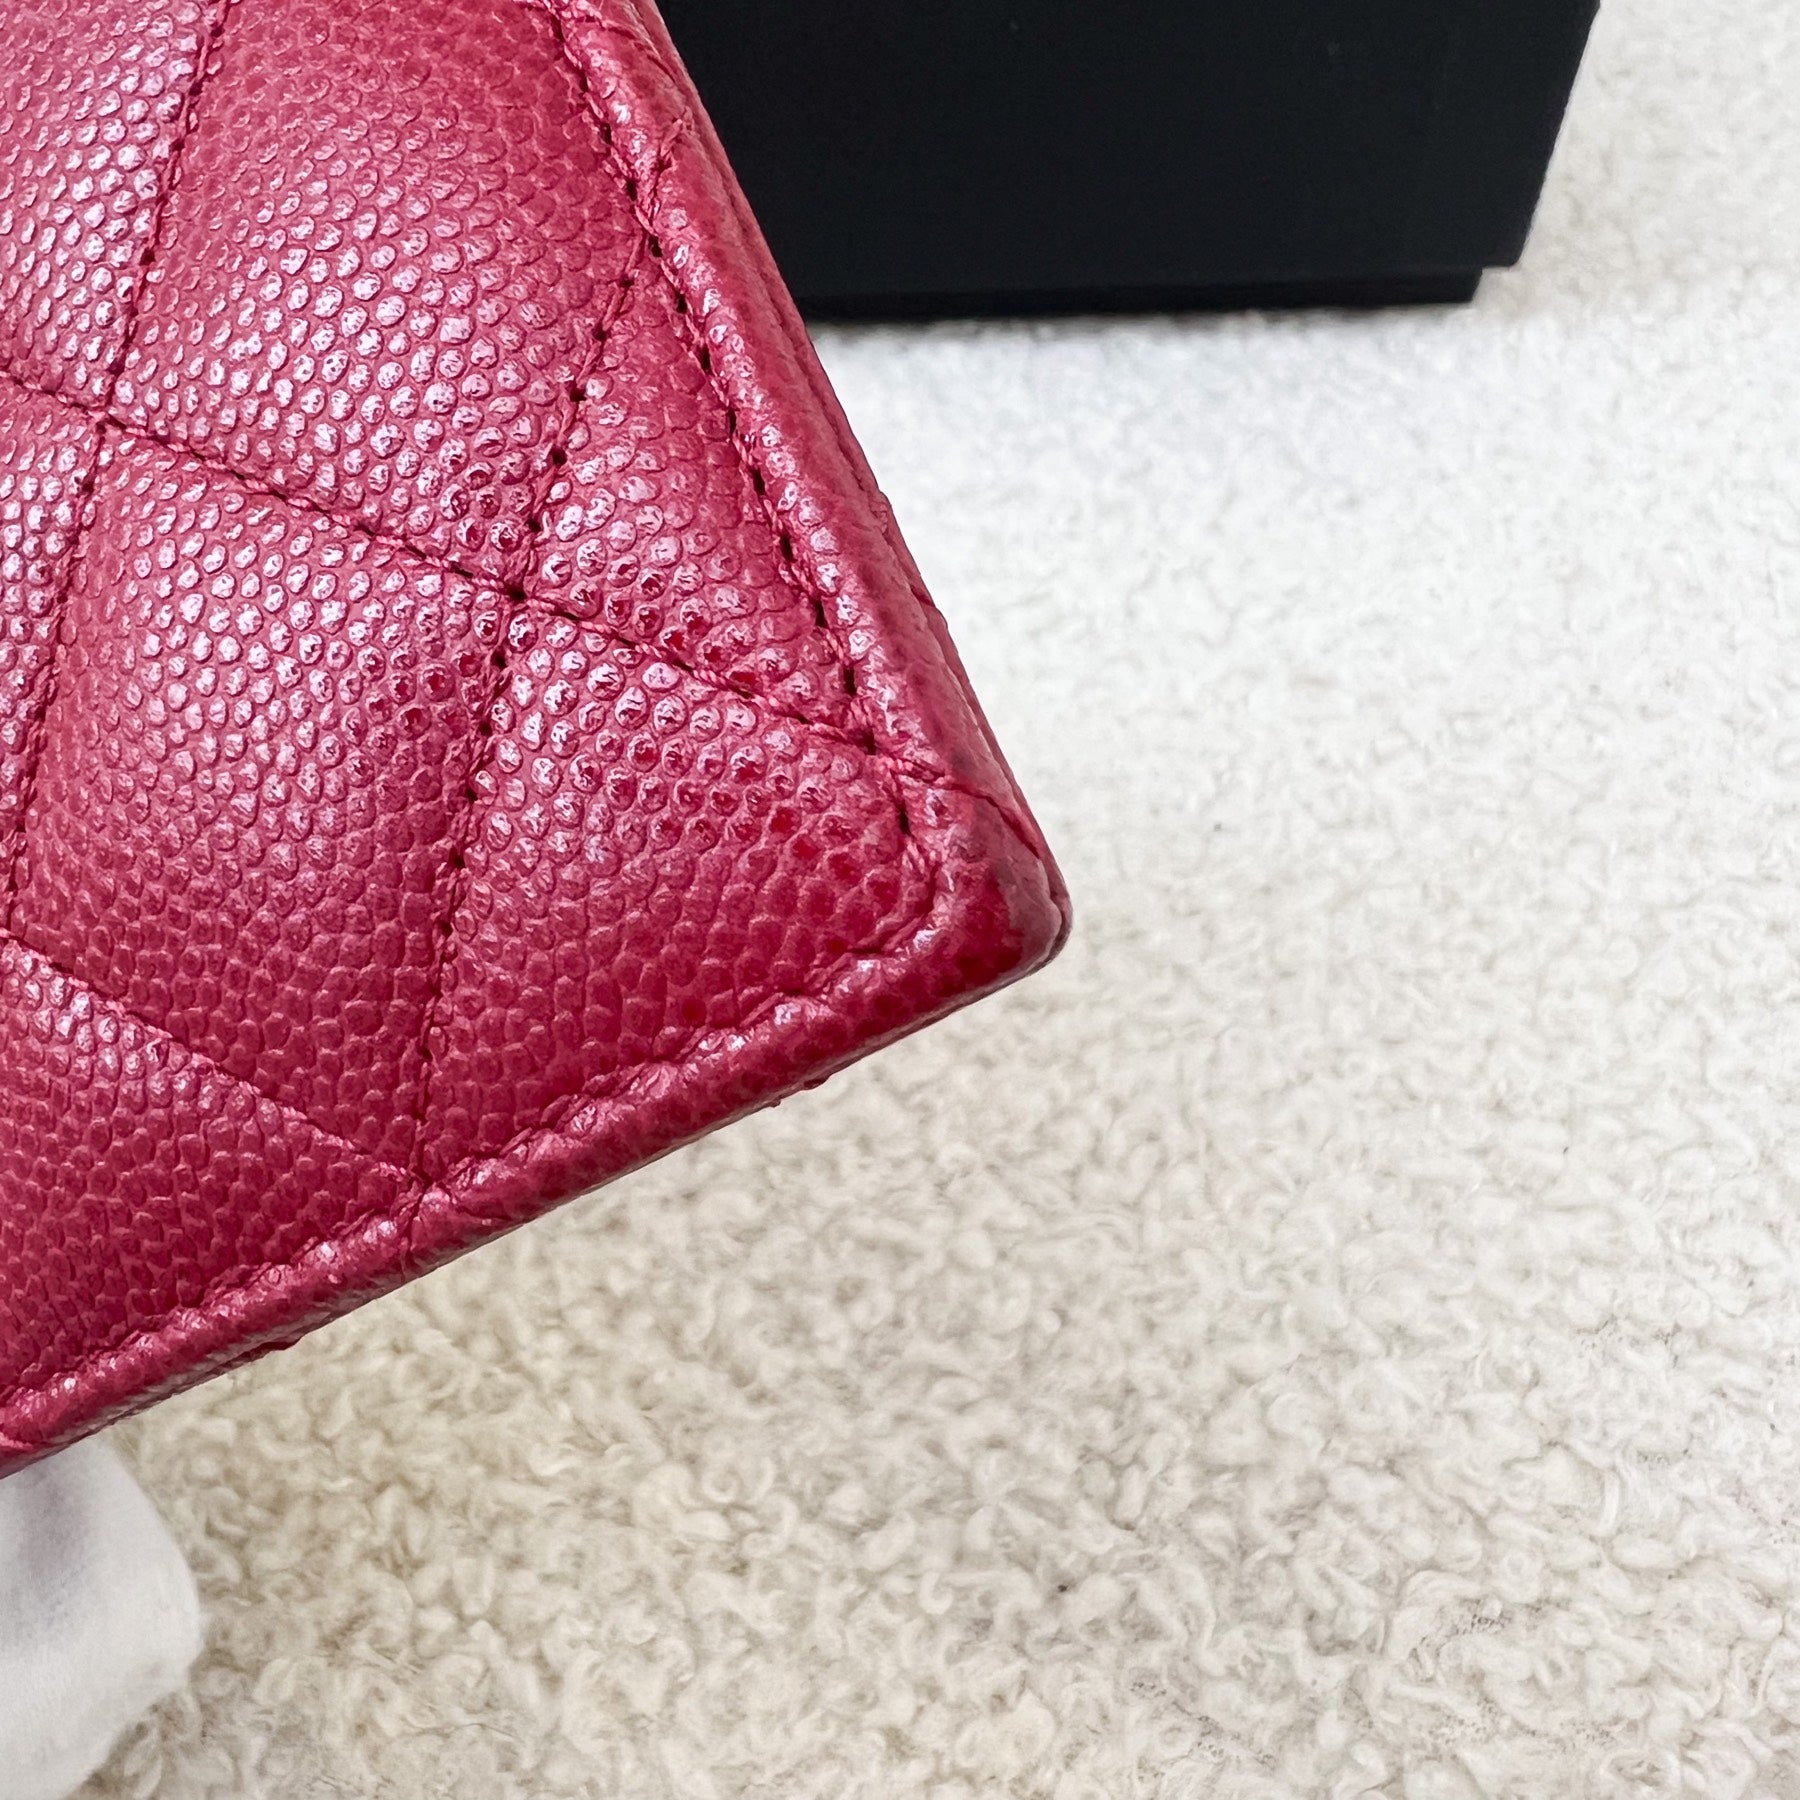 💯genuine Chanel Wallet, Card Holder, Red Caviar Leather , Zipped, BRAND  NEW